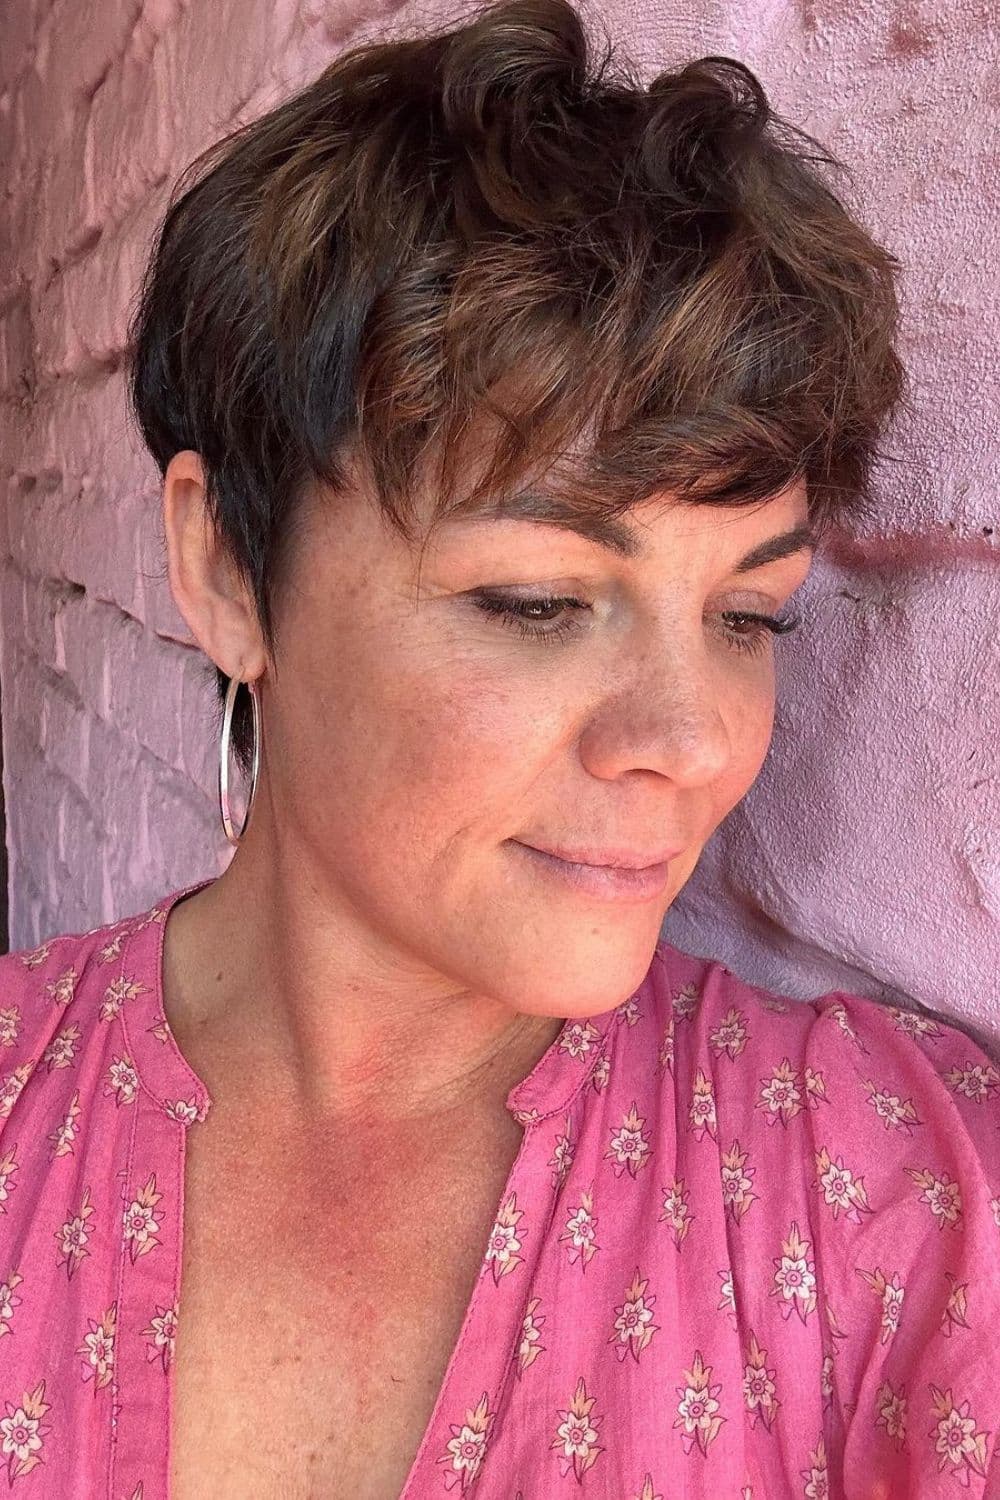 A woman with a brown pixie cut.